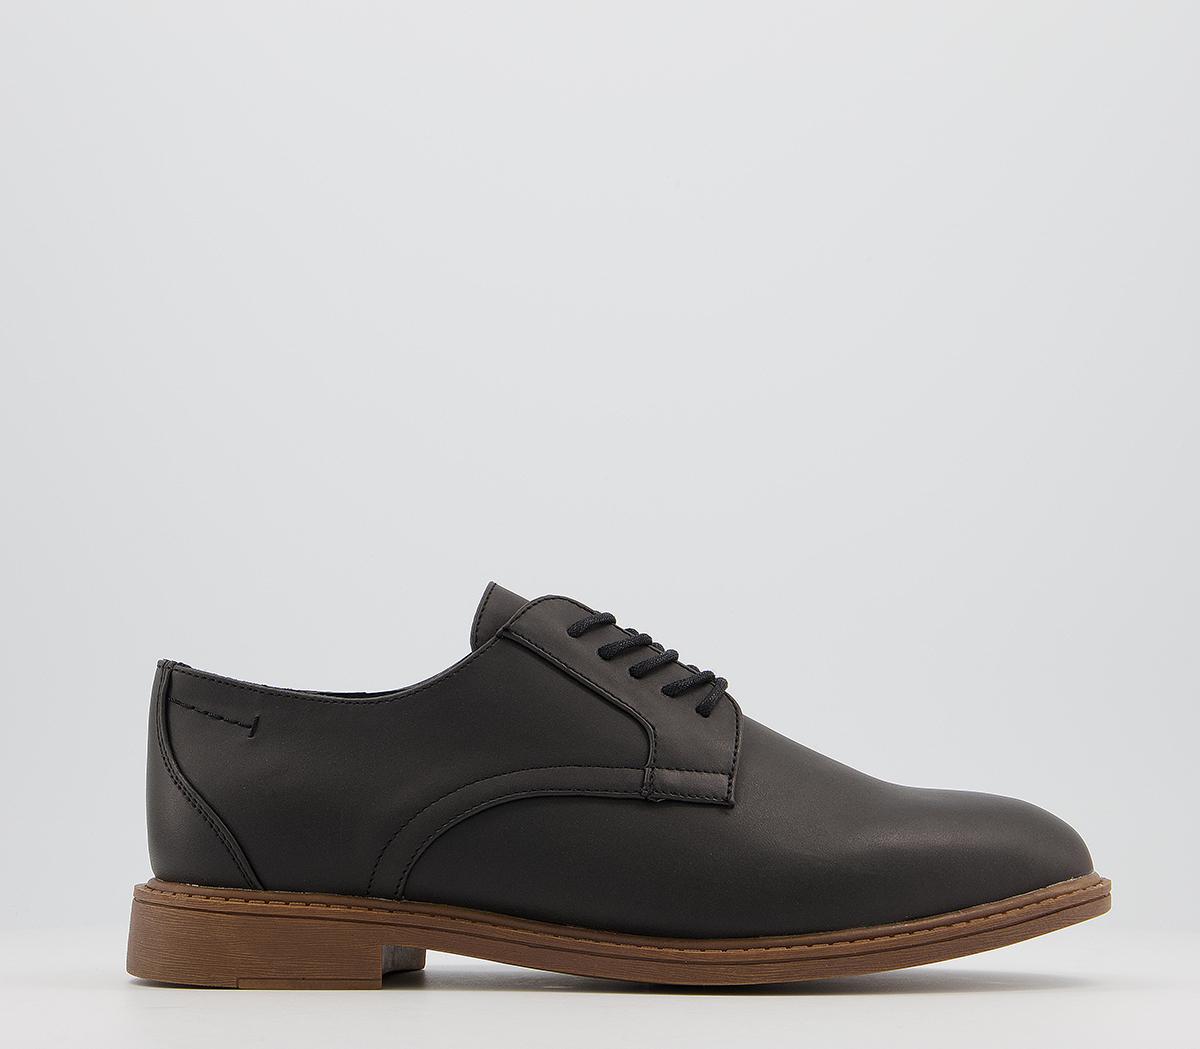 OFFICECallow Derby ShoesBlack